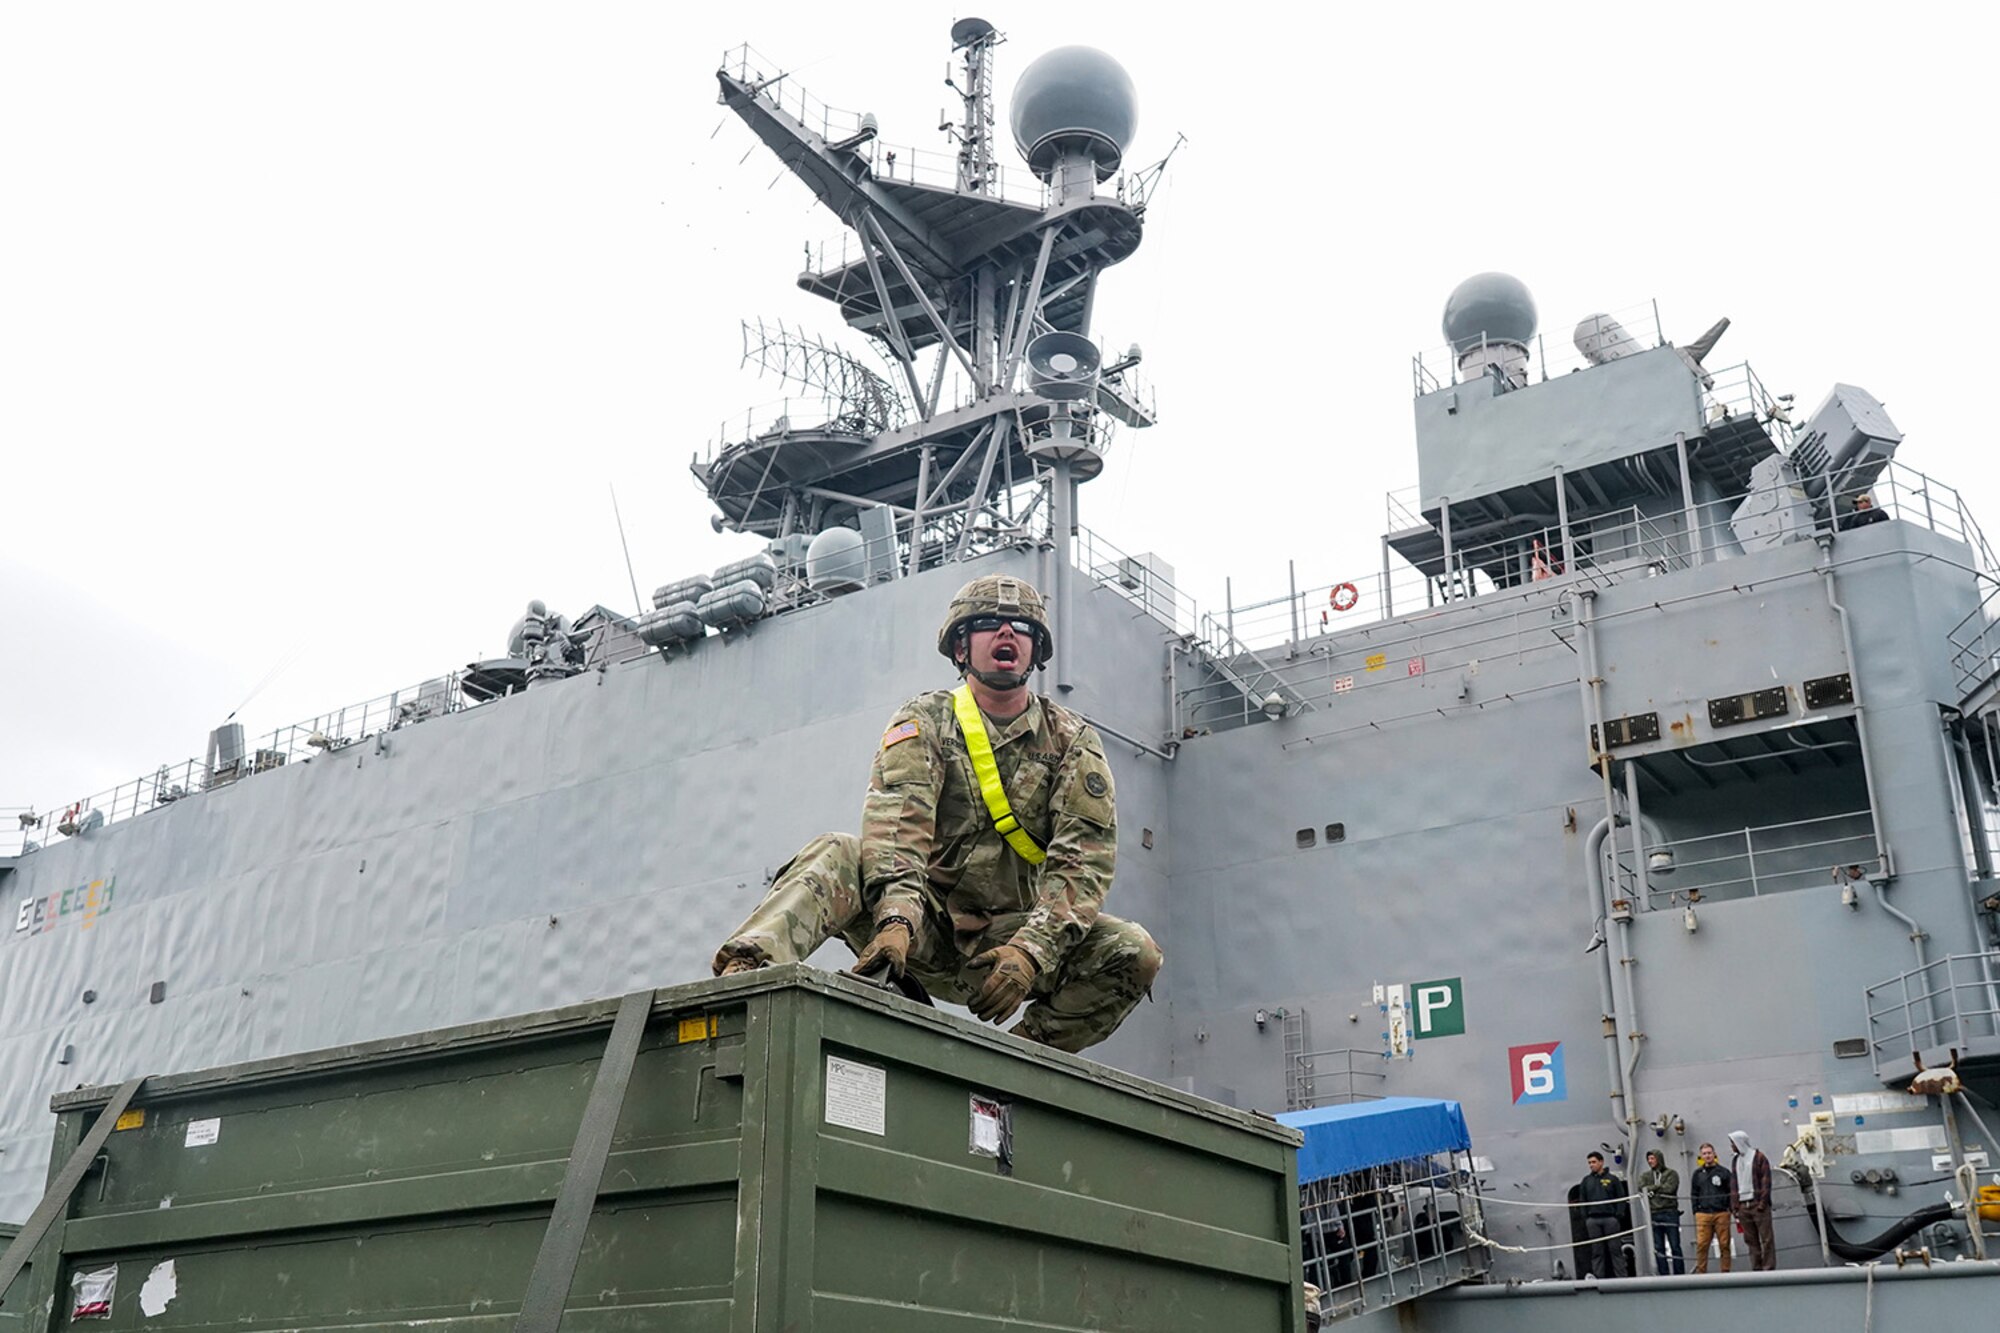 Specialist Zachary Verbruggen, assigned to the 109th Transportation Company, 17th Combat Support Sustainment Battalion, U.S. Army Alaska, yells to fellow Soldiers while securing U.S. Marine Corps bulk fuel supplies and equipment from the U.S.S. Comstock (LSD-45), a Whidbey Island-class dock landing ship, on an M872 trailer at the port of Seward, Alaska, Sept. 19, 2019, for transport to Joint Base Elmendorf-Richardson, Alaska. The U.S. Navy is conducting an Arctic Expeditionary Capabilities Exercise to test its logistical effectiveness and joint-service interoperability while responding to conflict or disaster in an austere environment with no organic assets.